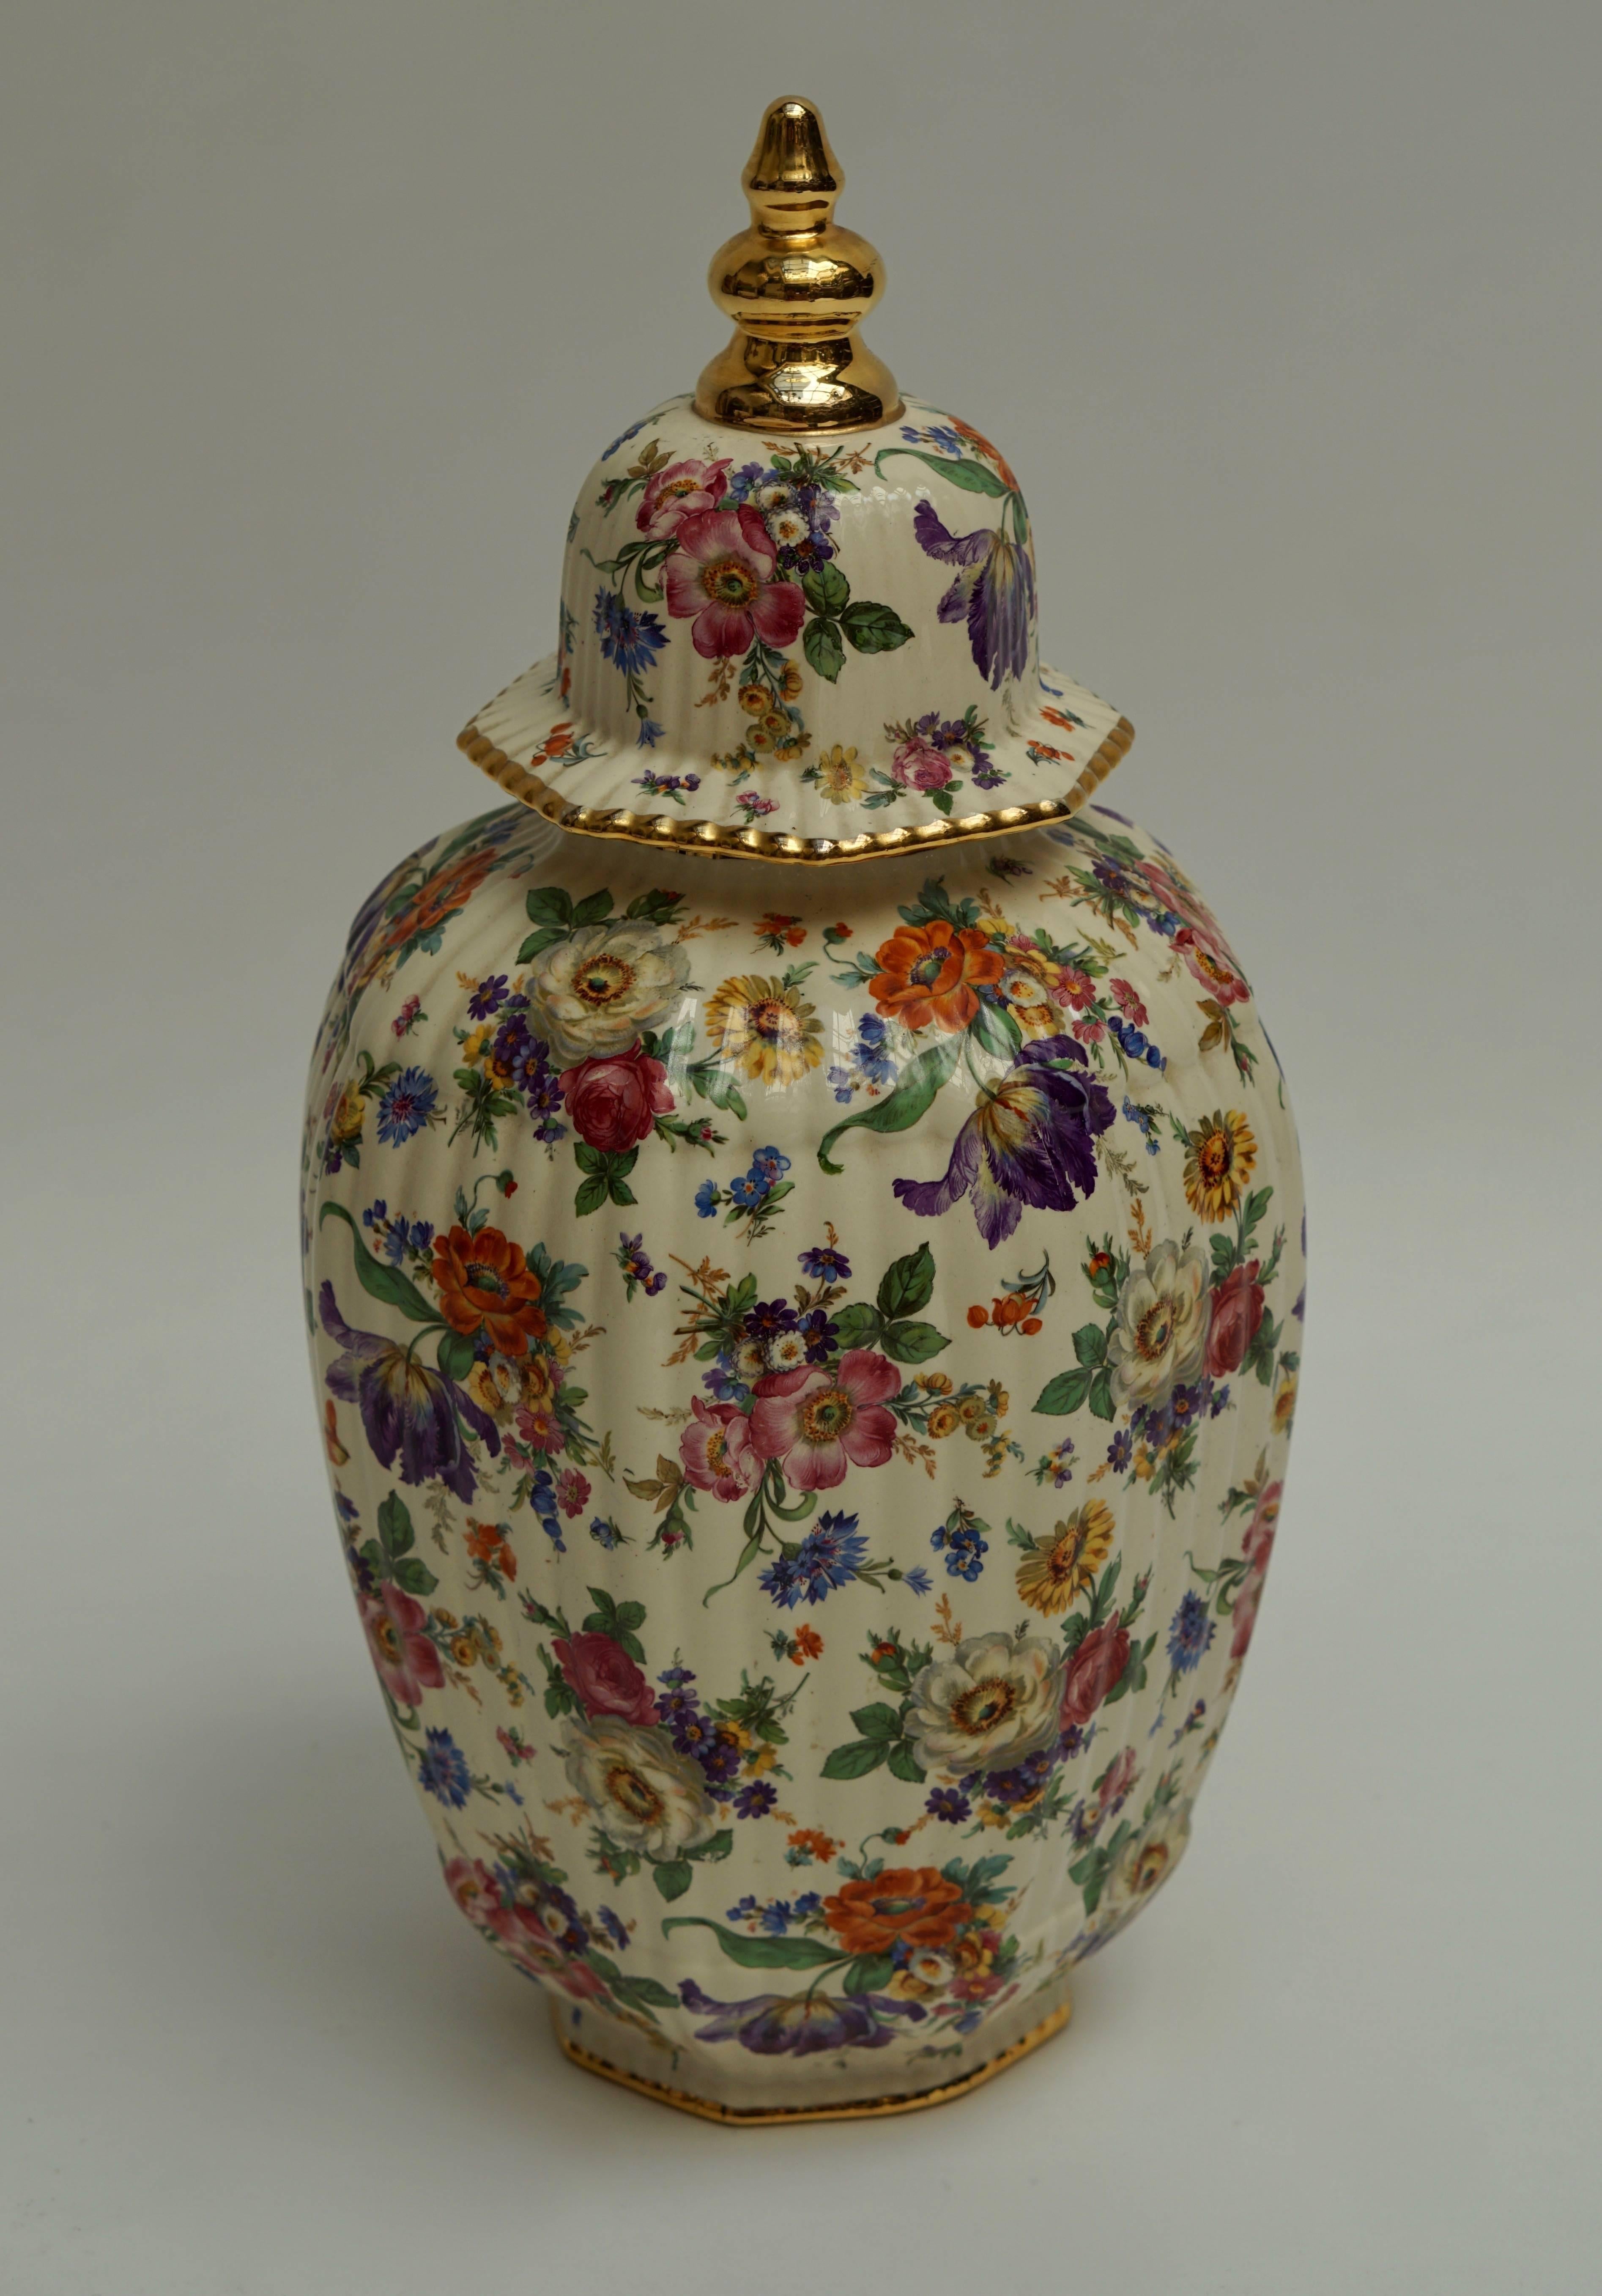 Boch ceramic lidded jar.
Massive jar with a decorative flowers pattern by Boch Louveire ceramic. Vase is marked.